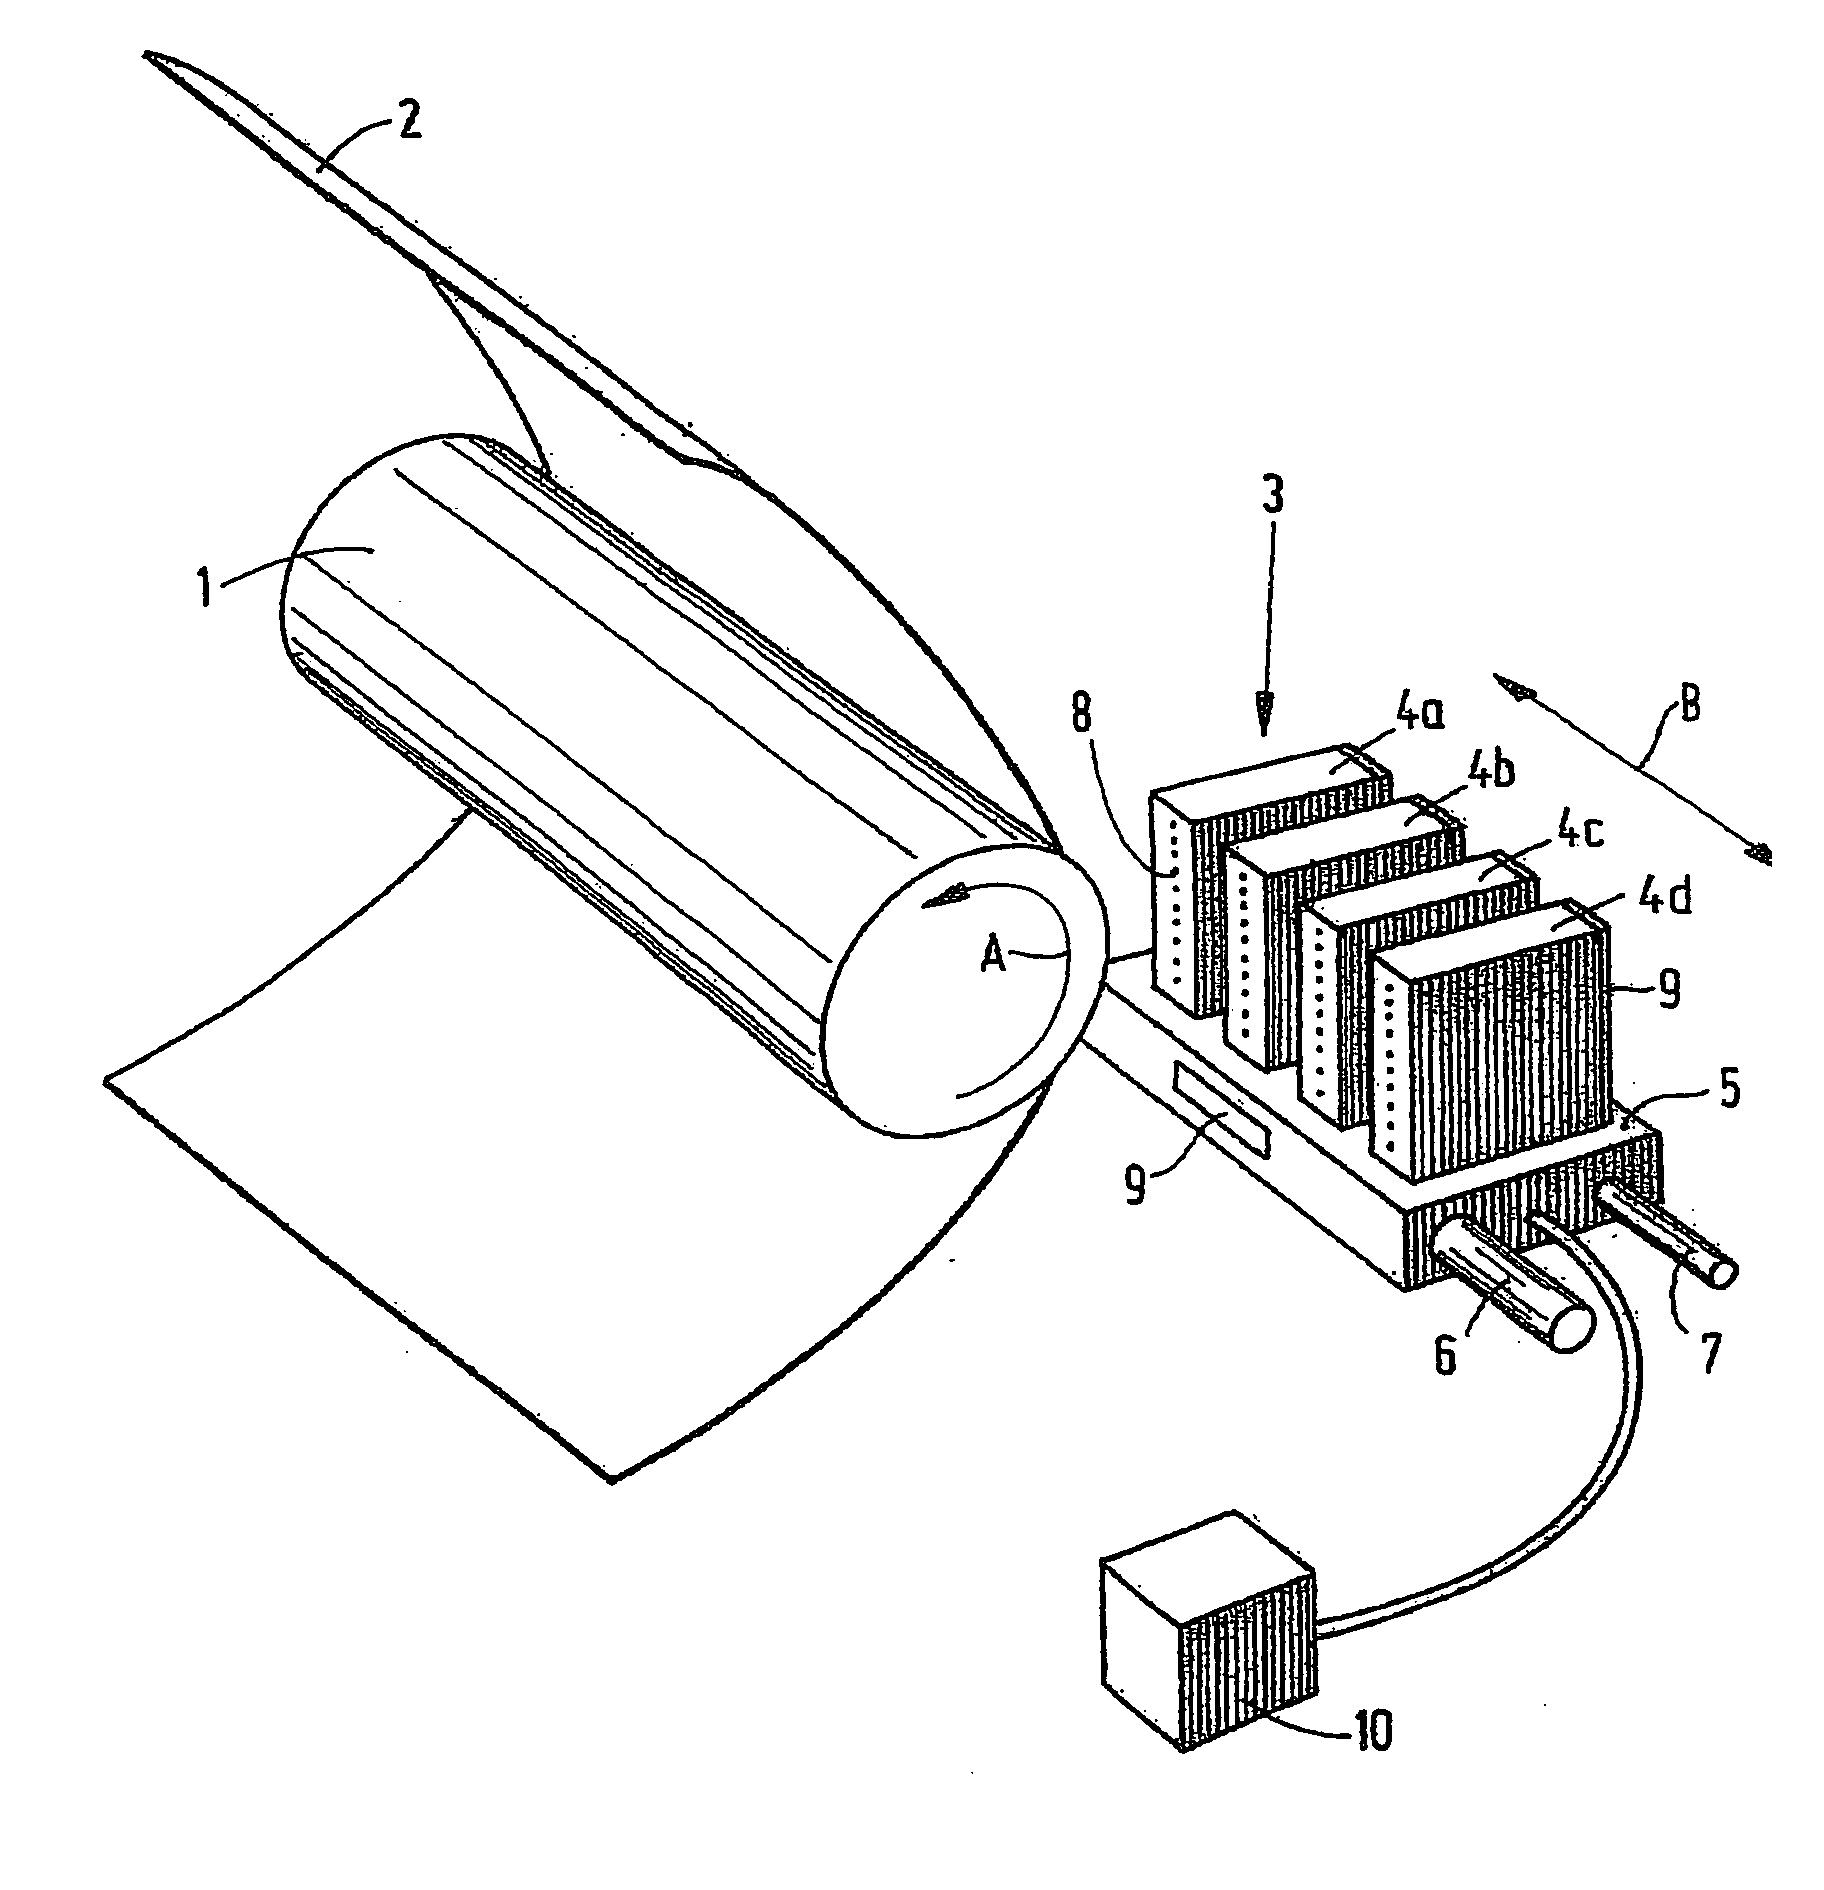 Printing method for use in an inkjet printer and an inkjet printer which has been modified for the printing method